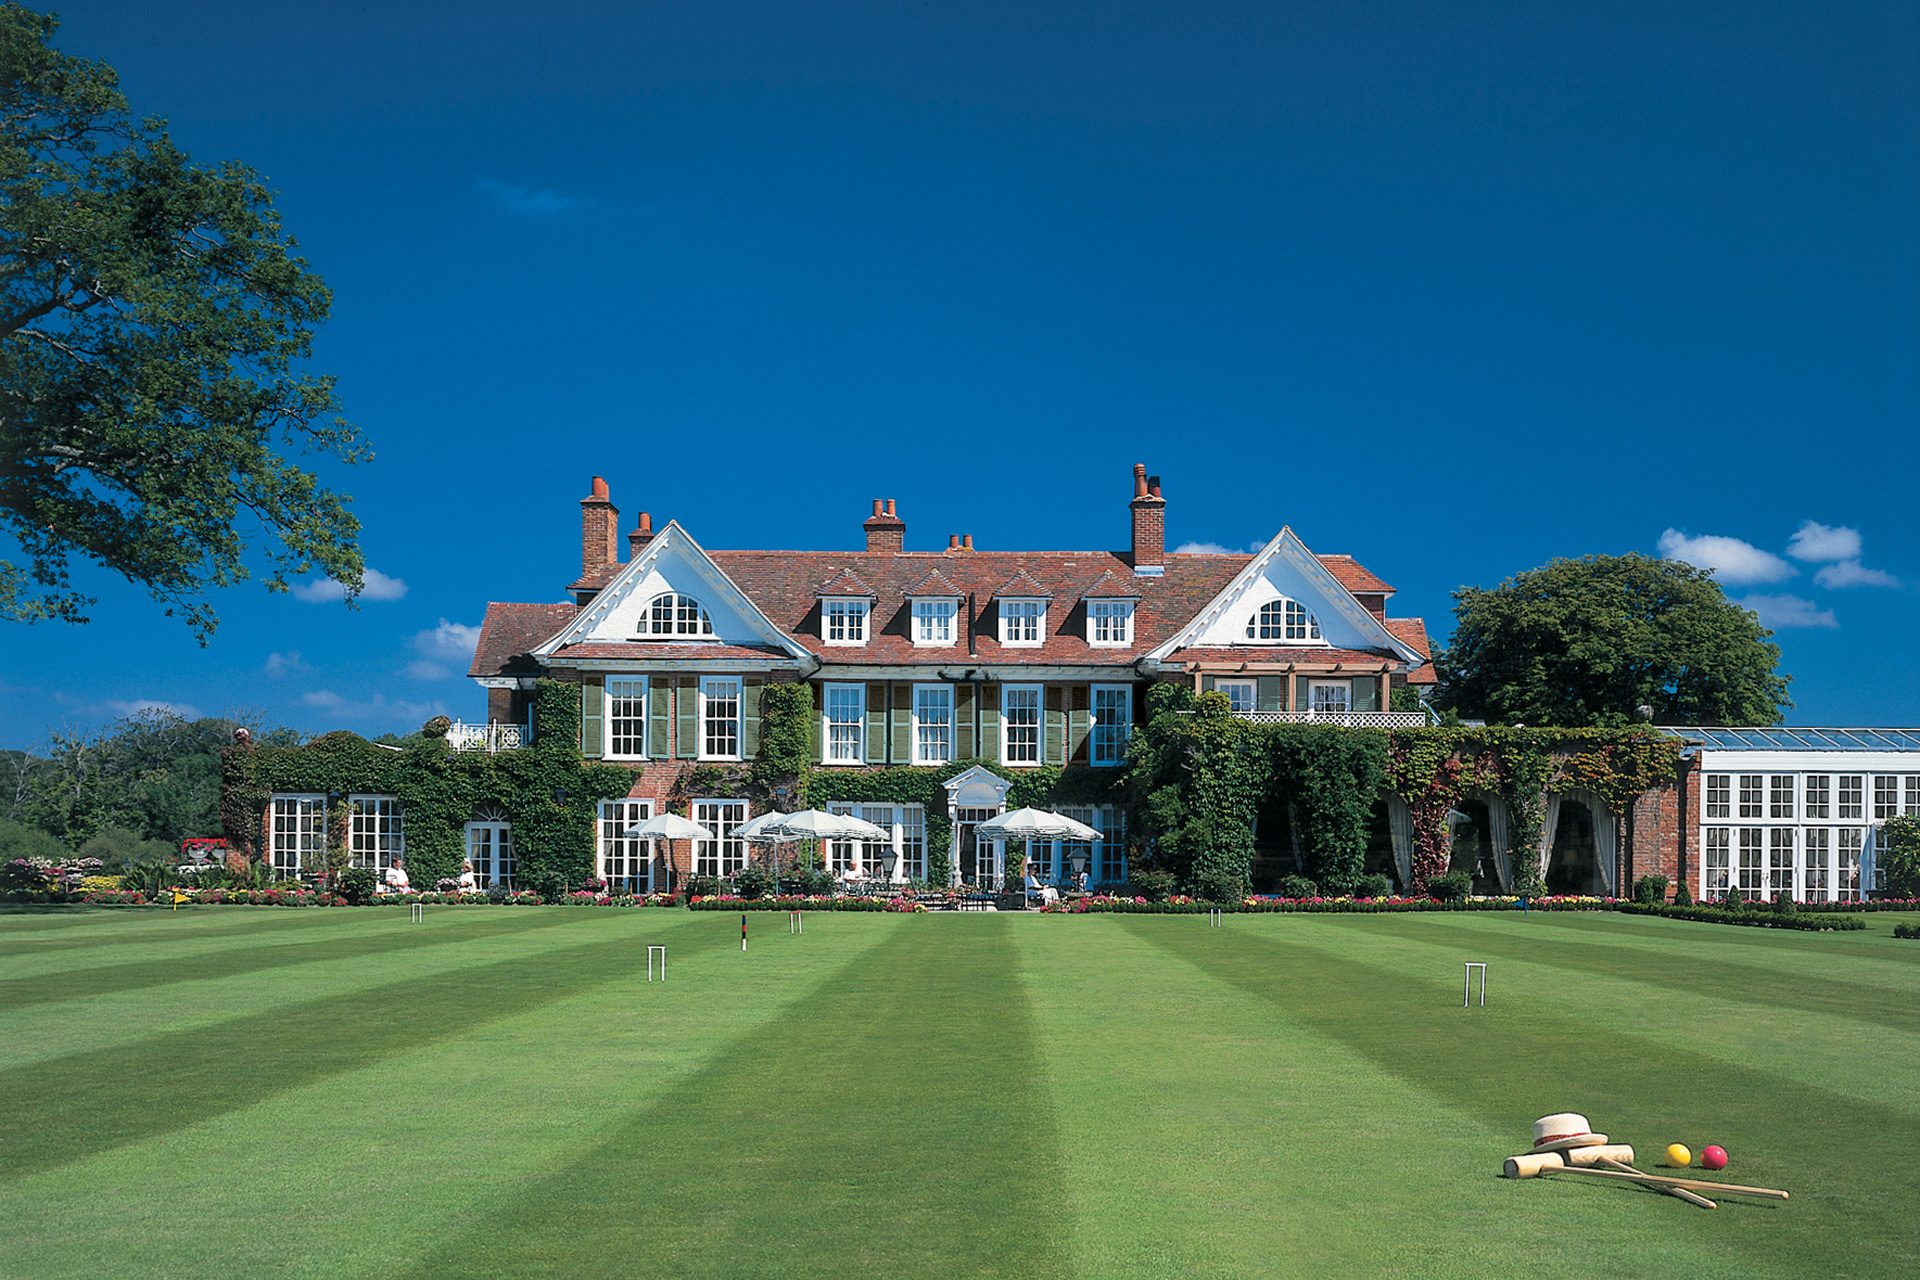 Exterior of grand red brick hotel with manicured lawns and croquet set in the foreground